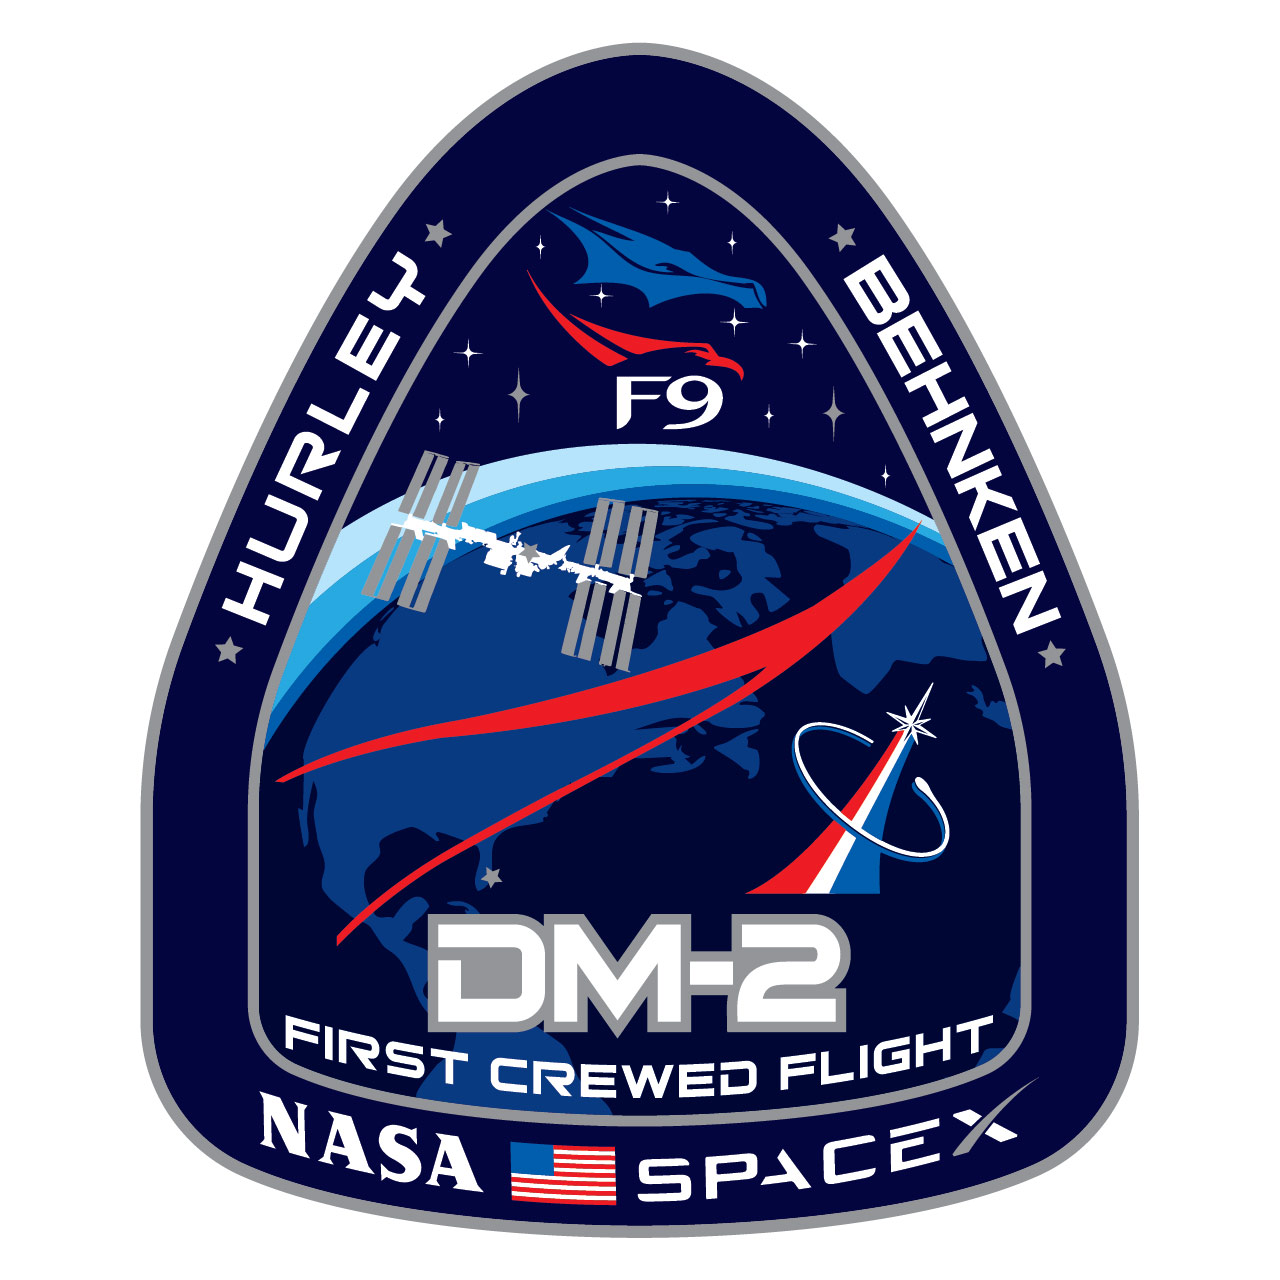 DRAGON IN-FLIGHT ABORT TEST MISSION PATCH CONFIRMING DRAGON SAFE FOR ASTRONAUTS 